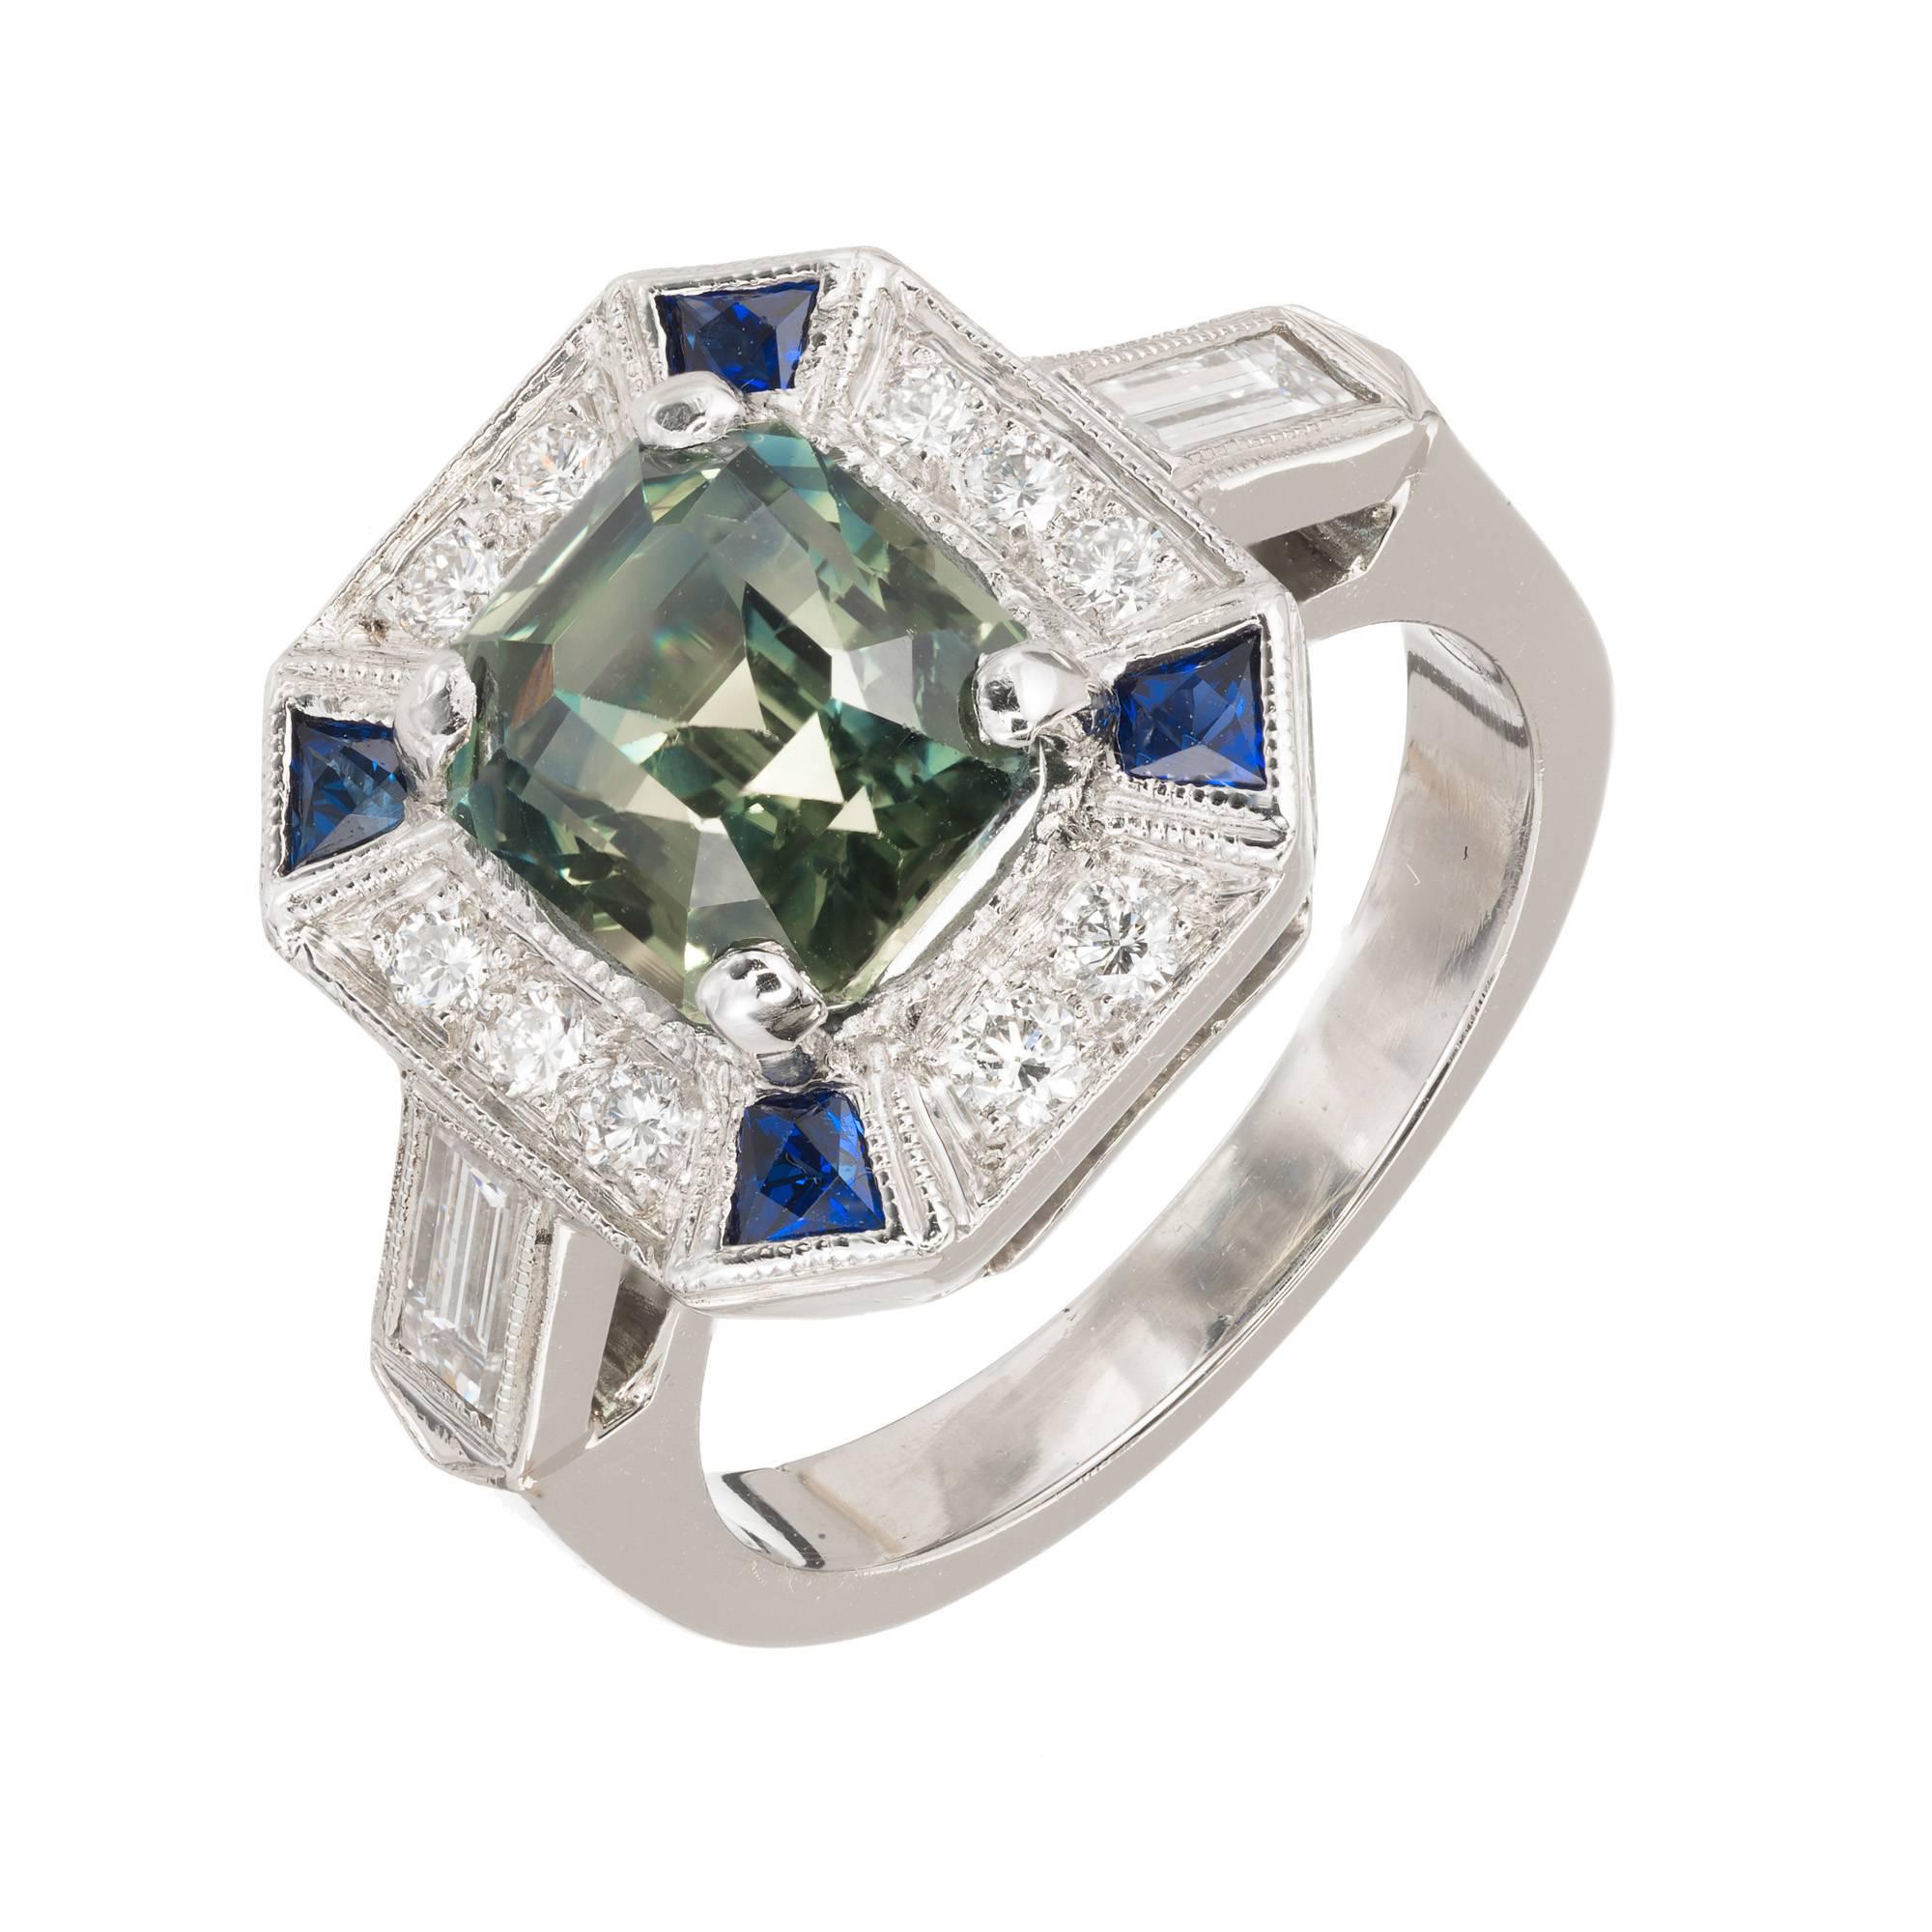 Peter Suchy handmade platinum engagement ring with a no heat octagonal step cut green sapphire. GIA Certified with a slight blue overtone.  The ring was designed and made to bring out and showcase the natural beauty of the center stone.  Four